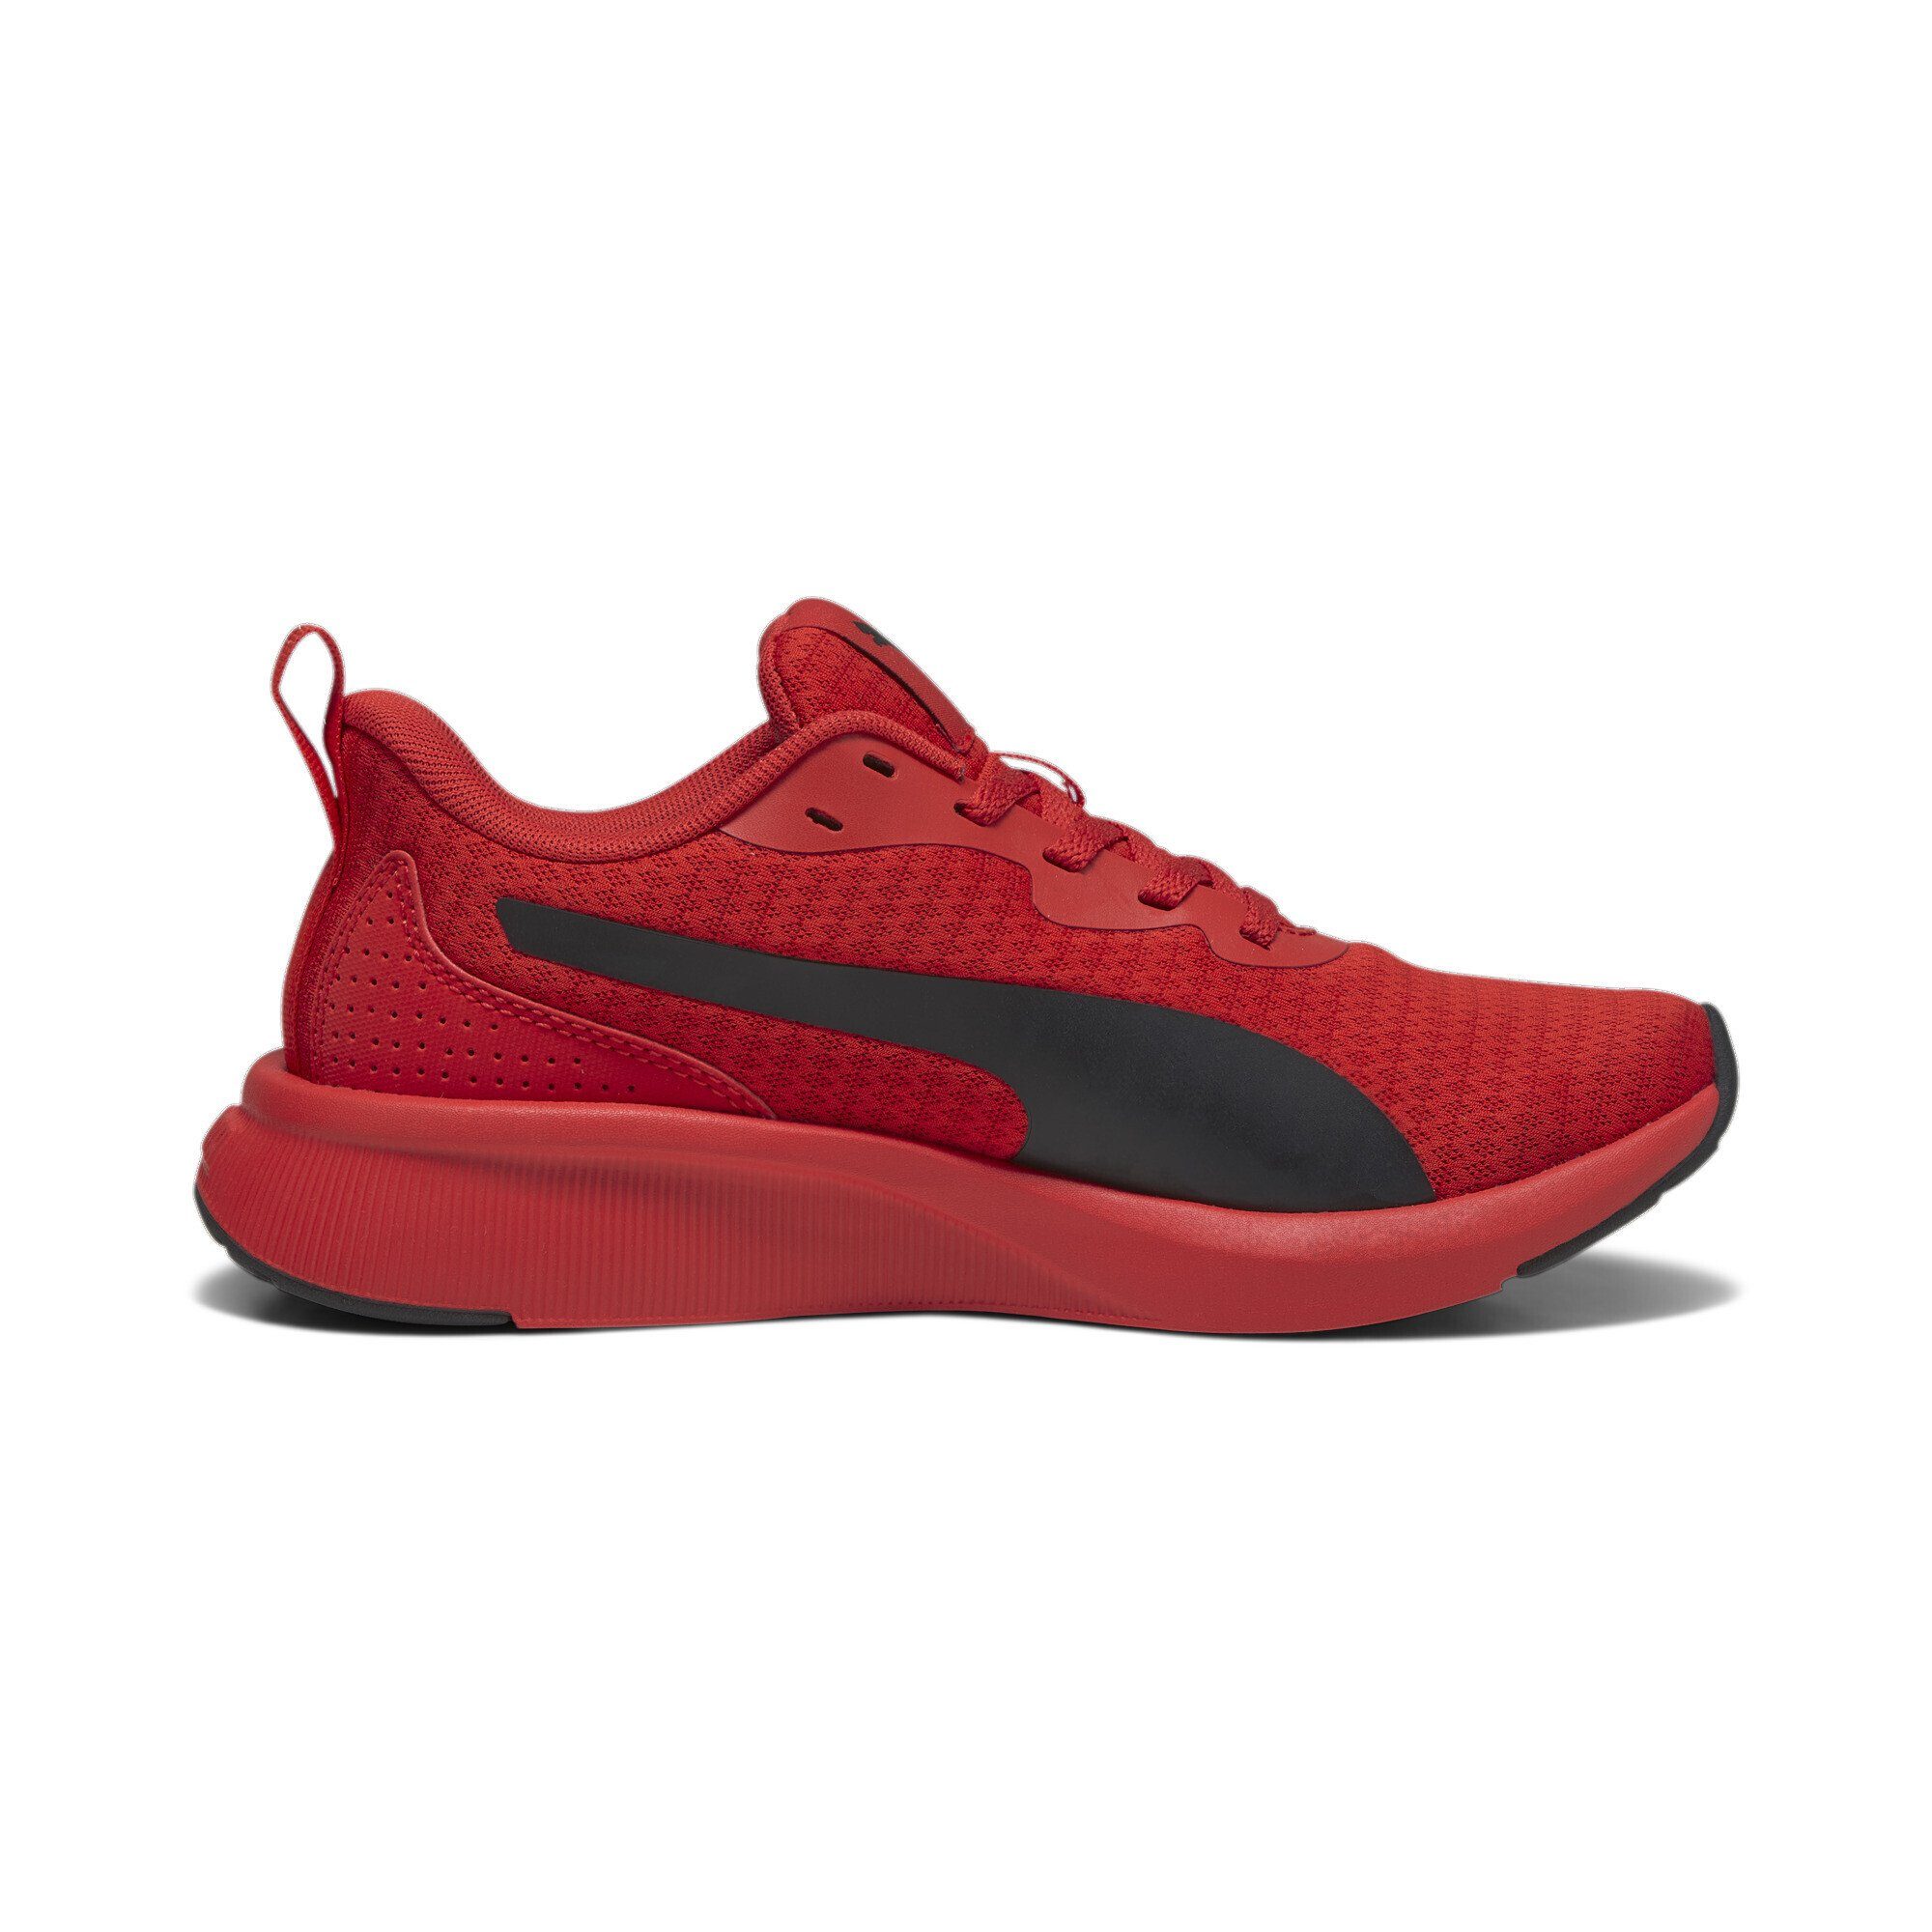 Lite Time PUMA Flyer Trainingsschuh All Red For Sneakers Black Jugendliche